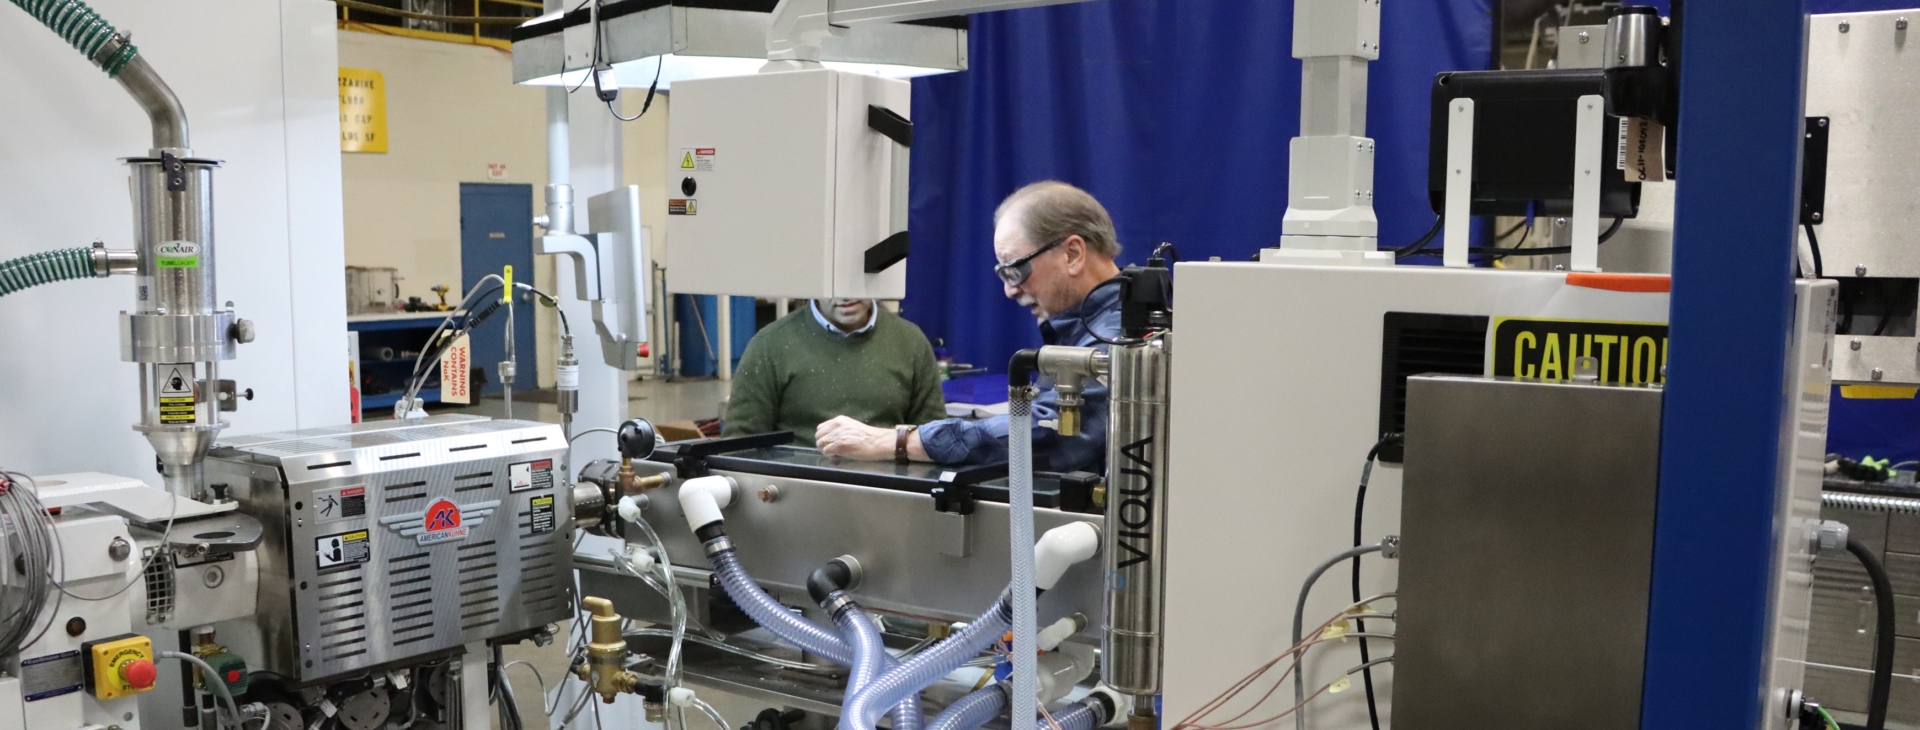 Extrusion Operator optimizing a medical extrusion system